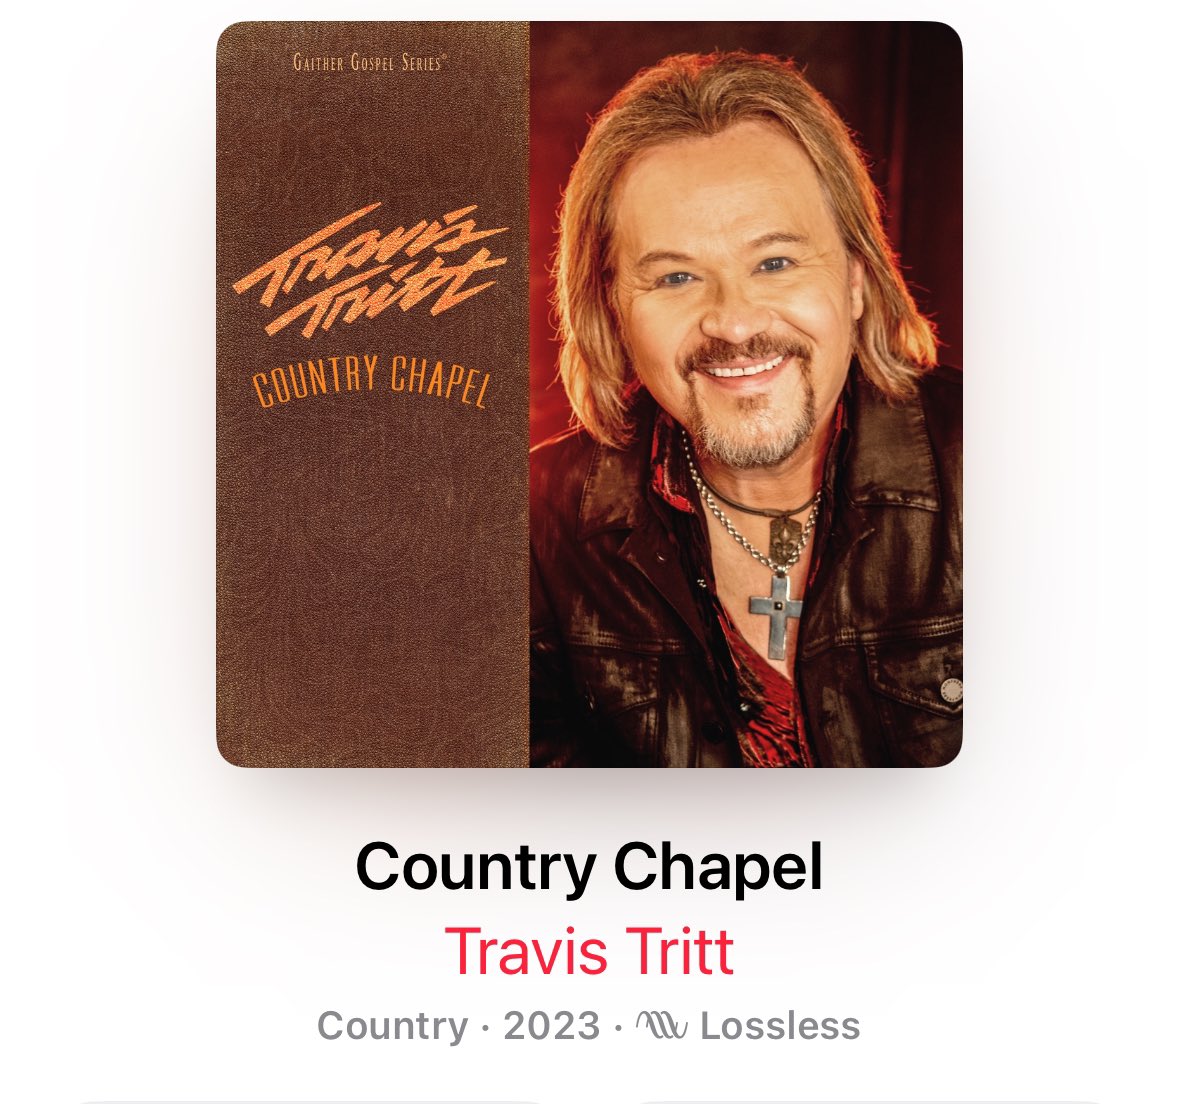 Celebrating @Travistritt Tuesday by listening to COUNTRY CHAPEL